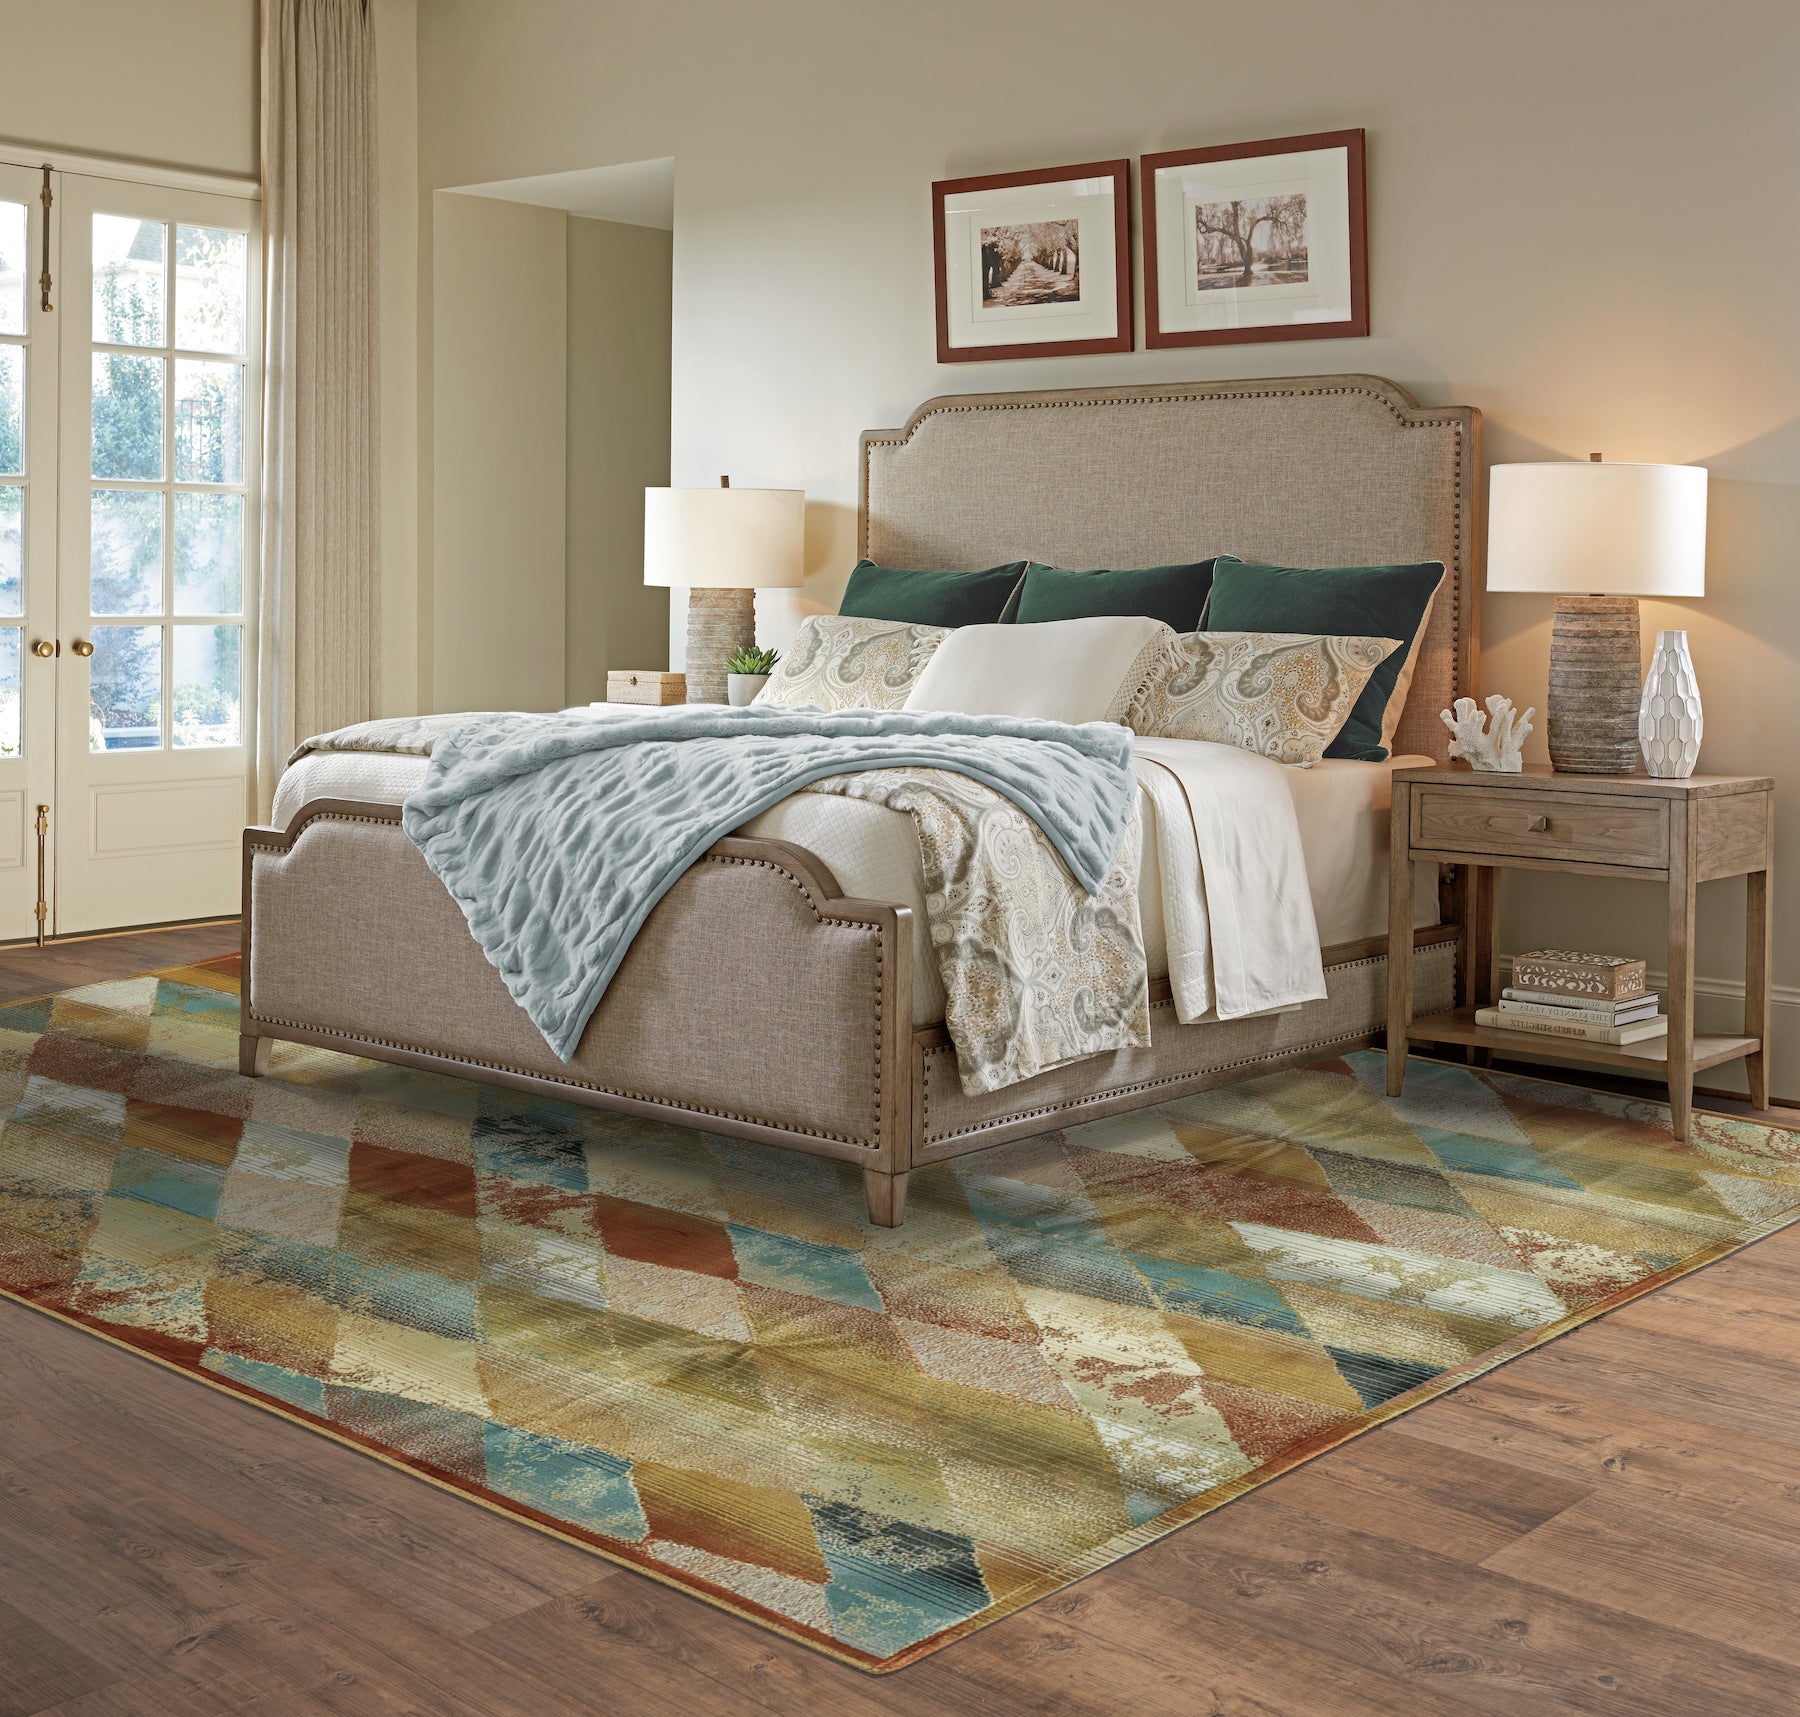 4 Reasons to Add Rugs to Your Bedroom